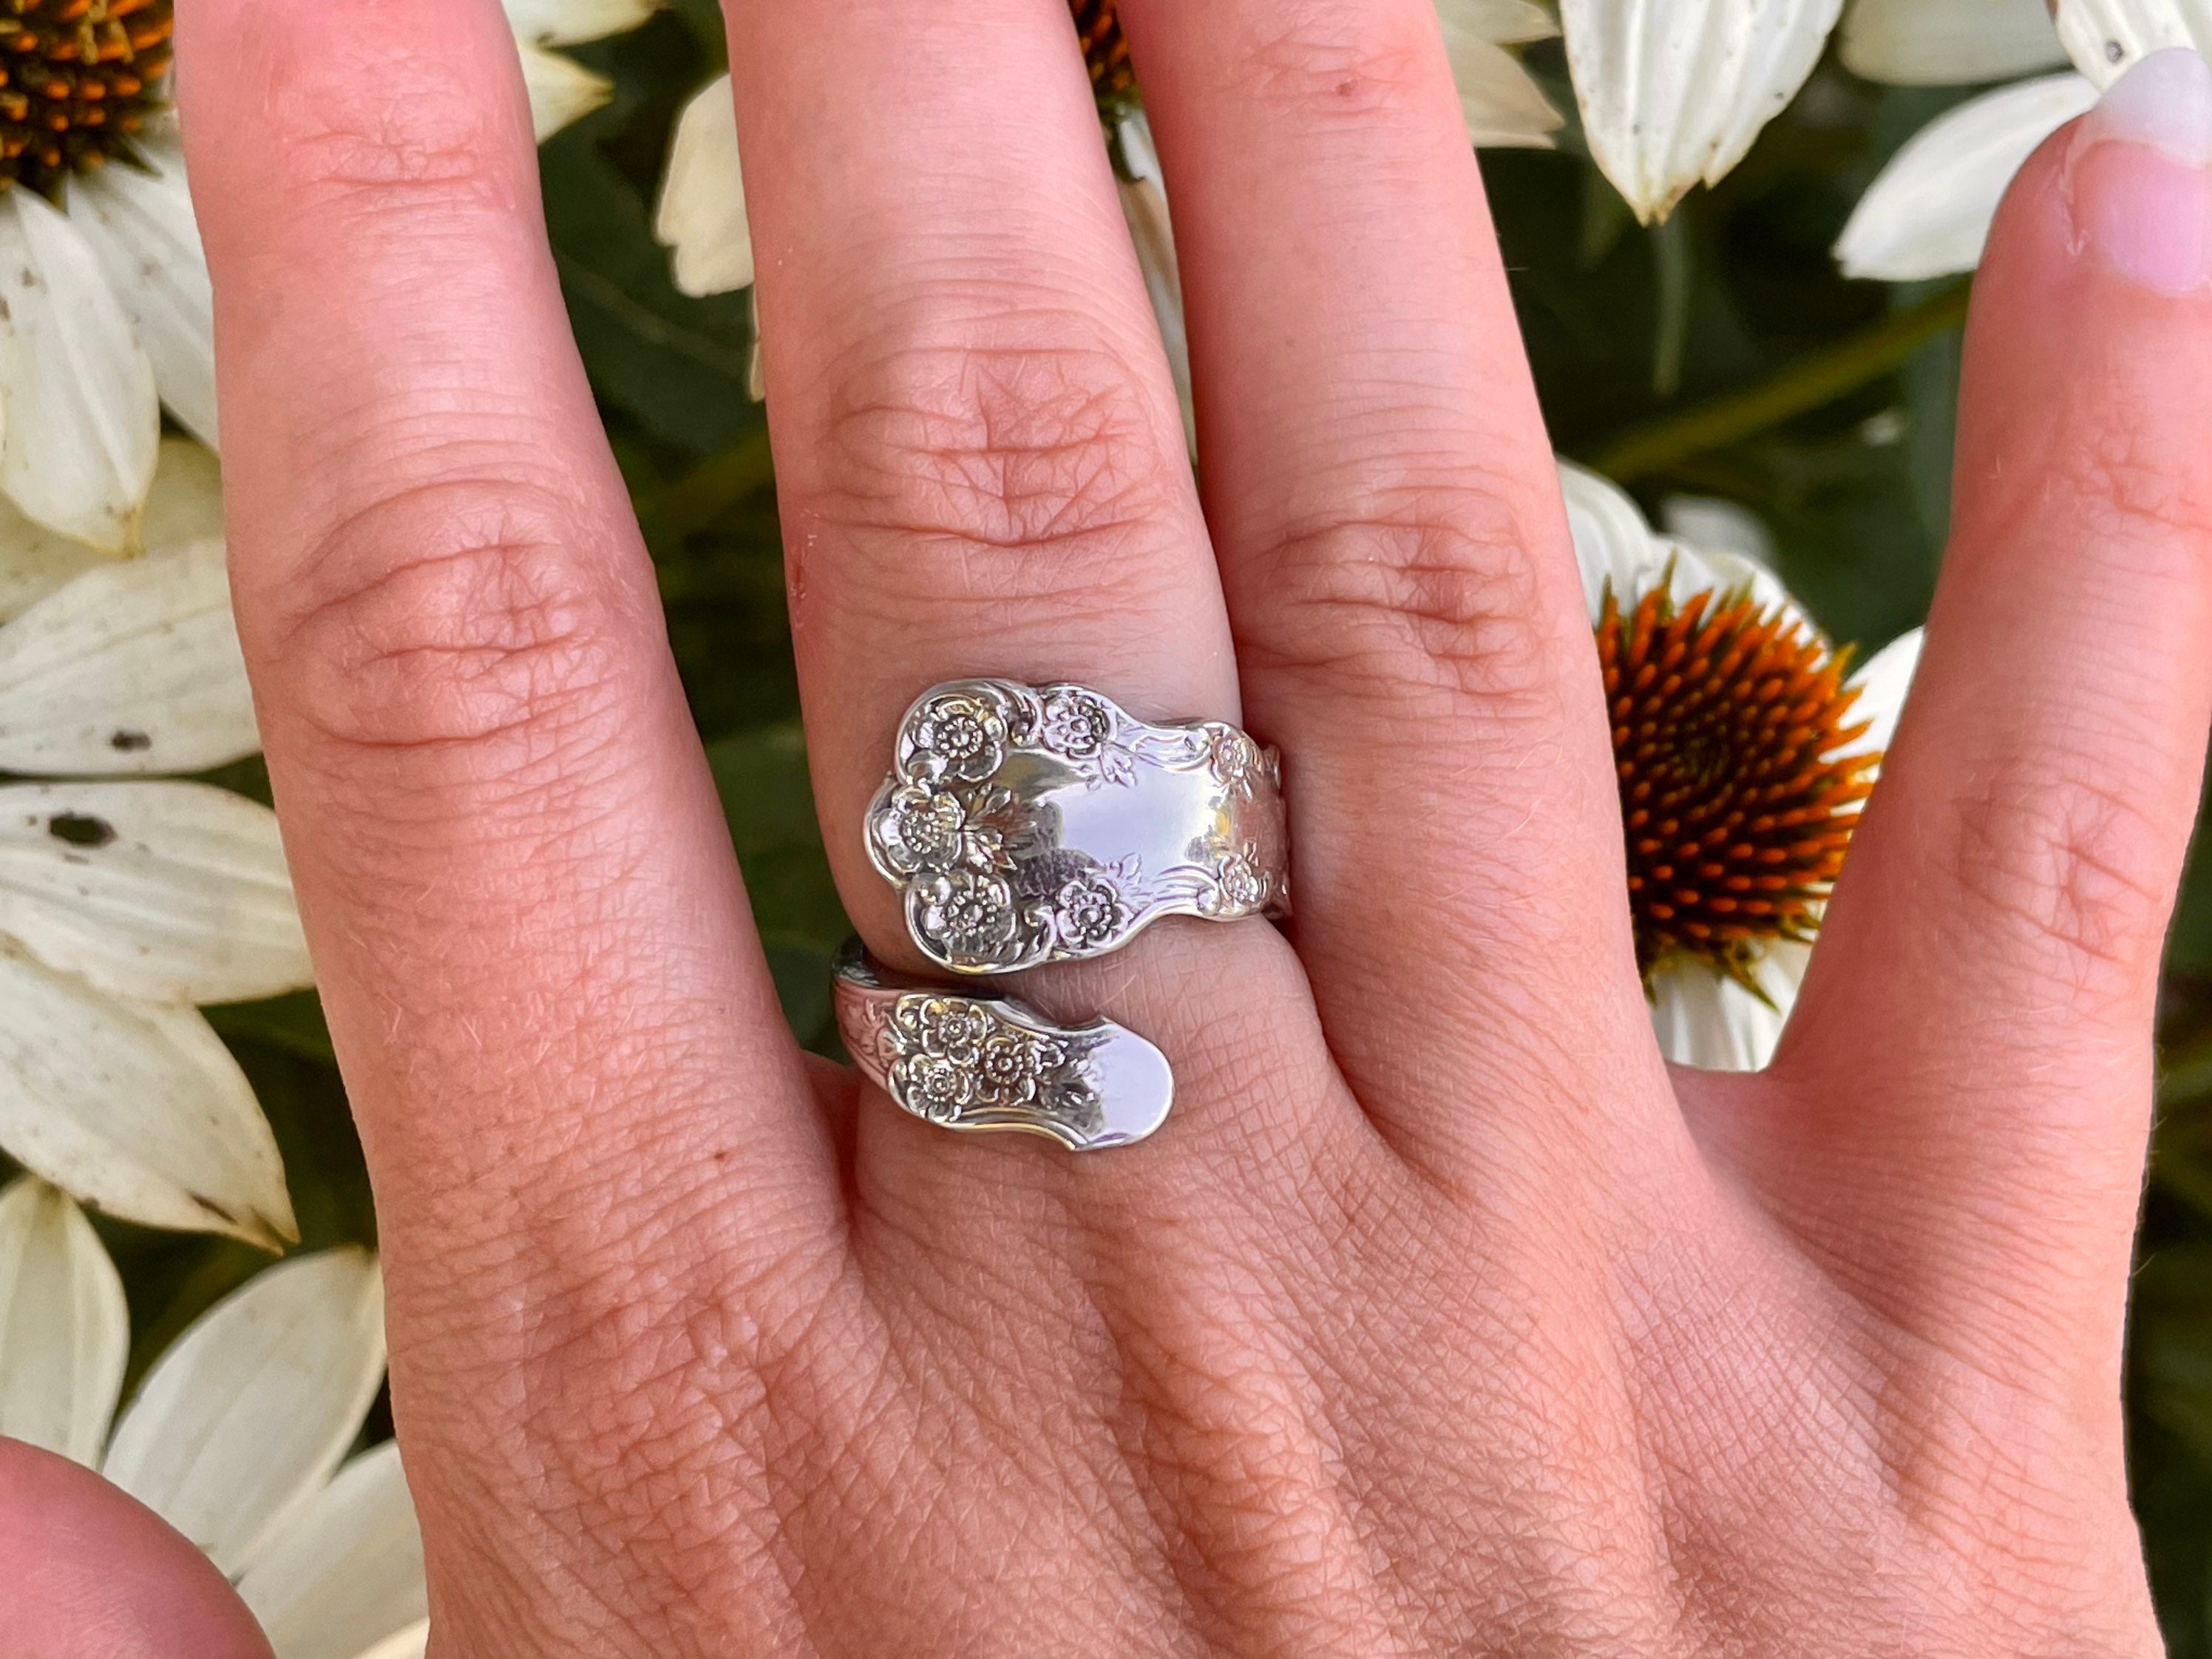 Dainty Floral Vintage Sterling Silver Spoon Ring Size 7.5 Adjustable, Sweet Romantic Gift, Silverware Jewelry, Flower Blossom Rings